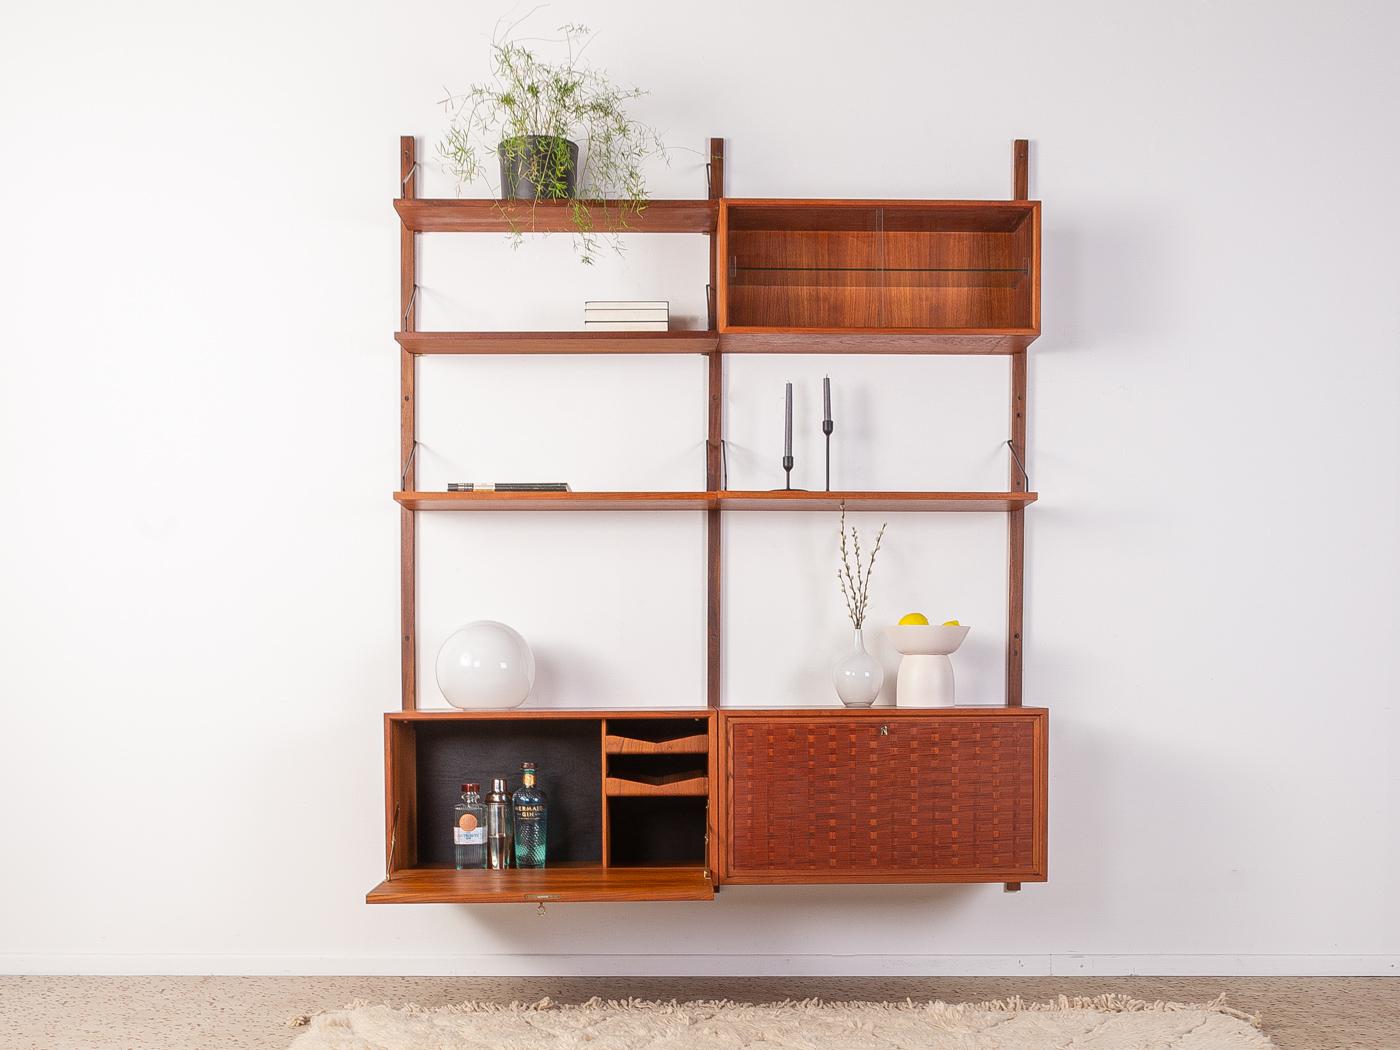 Classic shelving system from the 1960s. The high-quality containers and shelves are veneered in teak. The system consists of four shelves, one container with a hinged door and internal drawers, one container with hinged door and two shelves, one